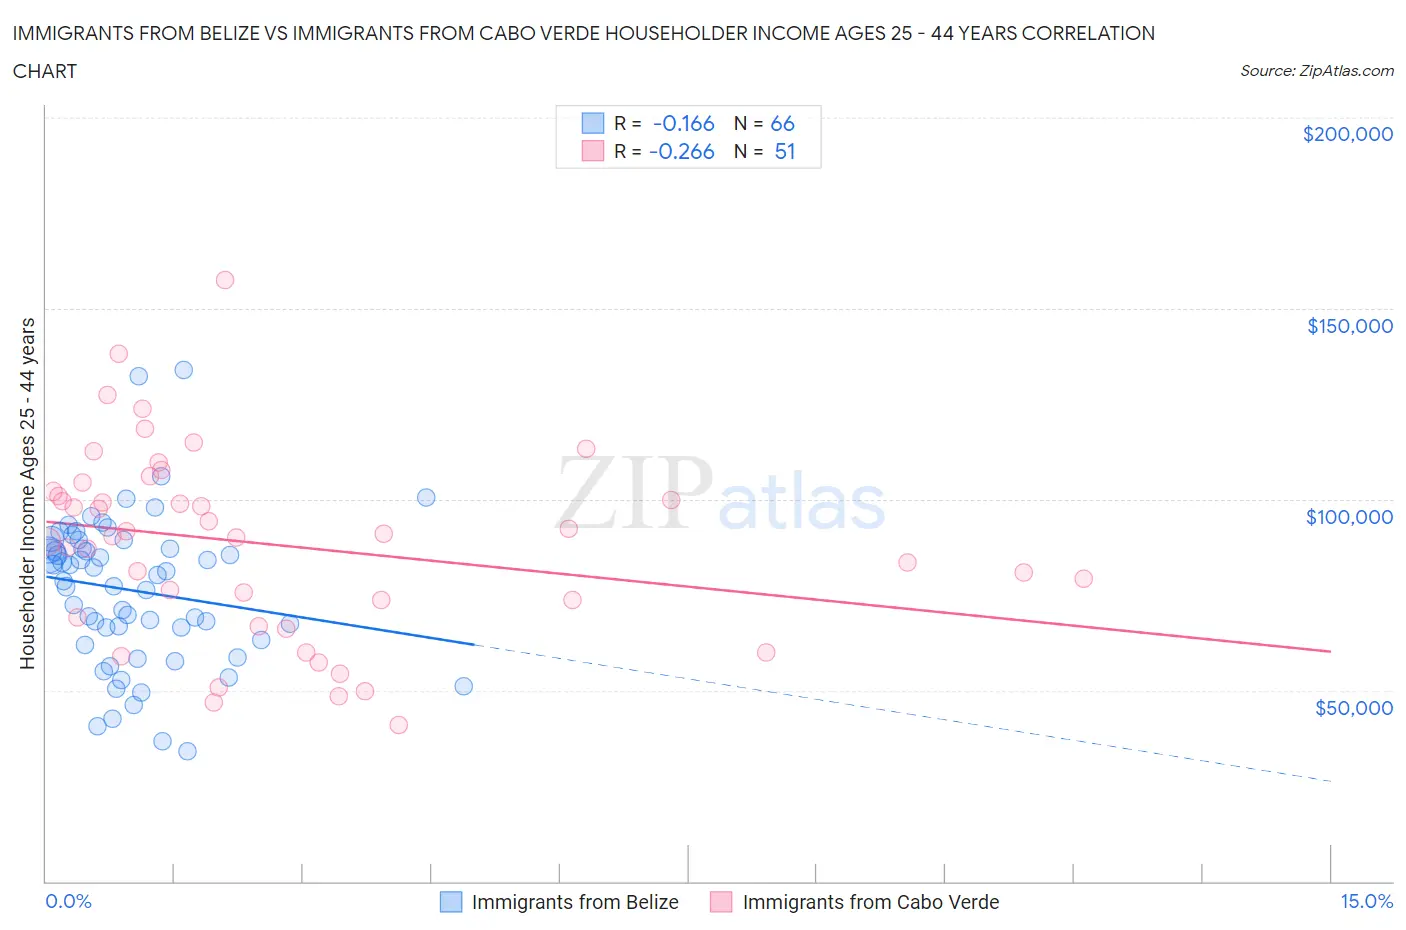 Immigrants from Belize vs Immigrants from Cabo Verde Householder Income Ages 25 - 44 years